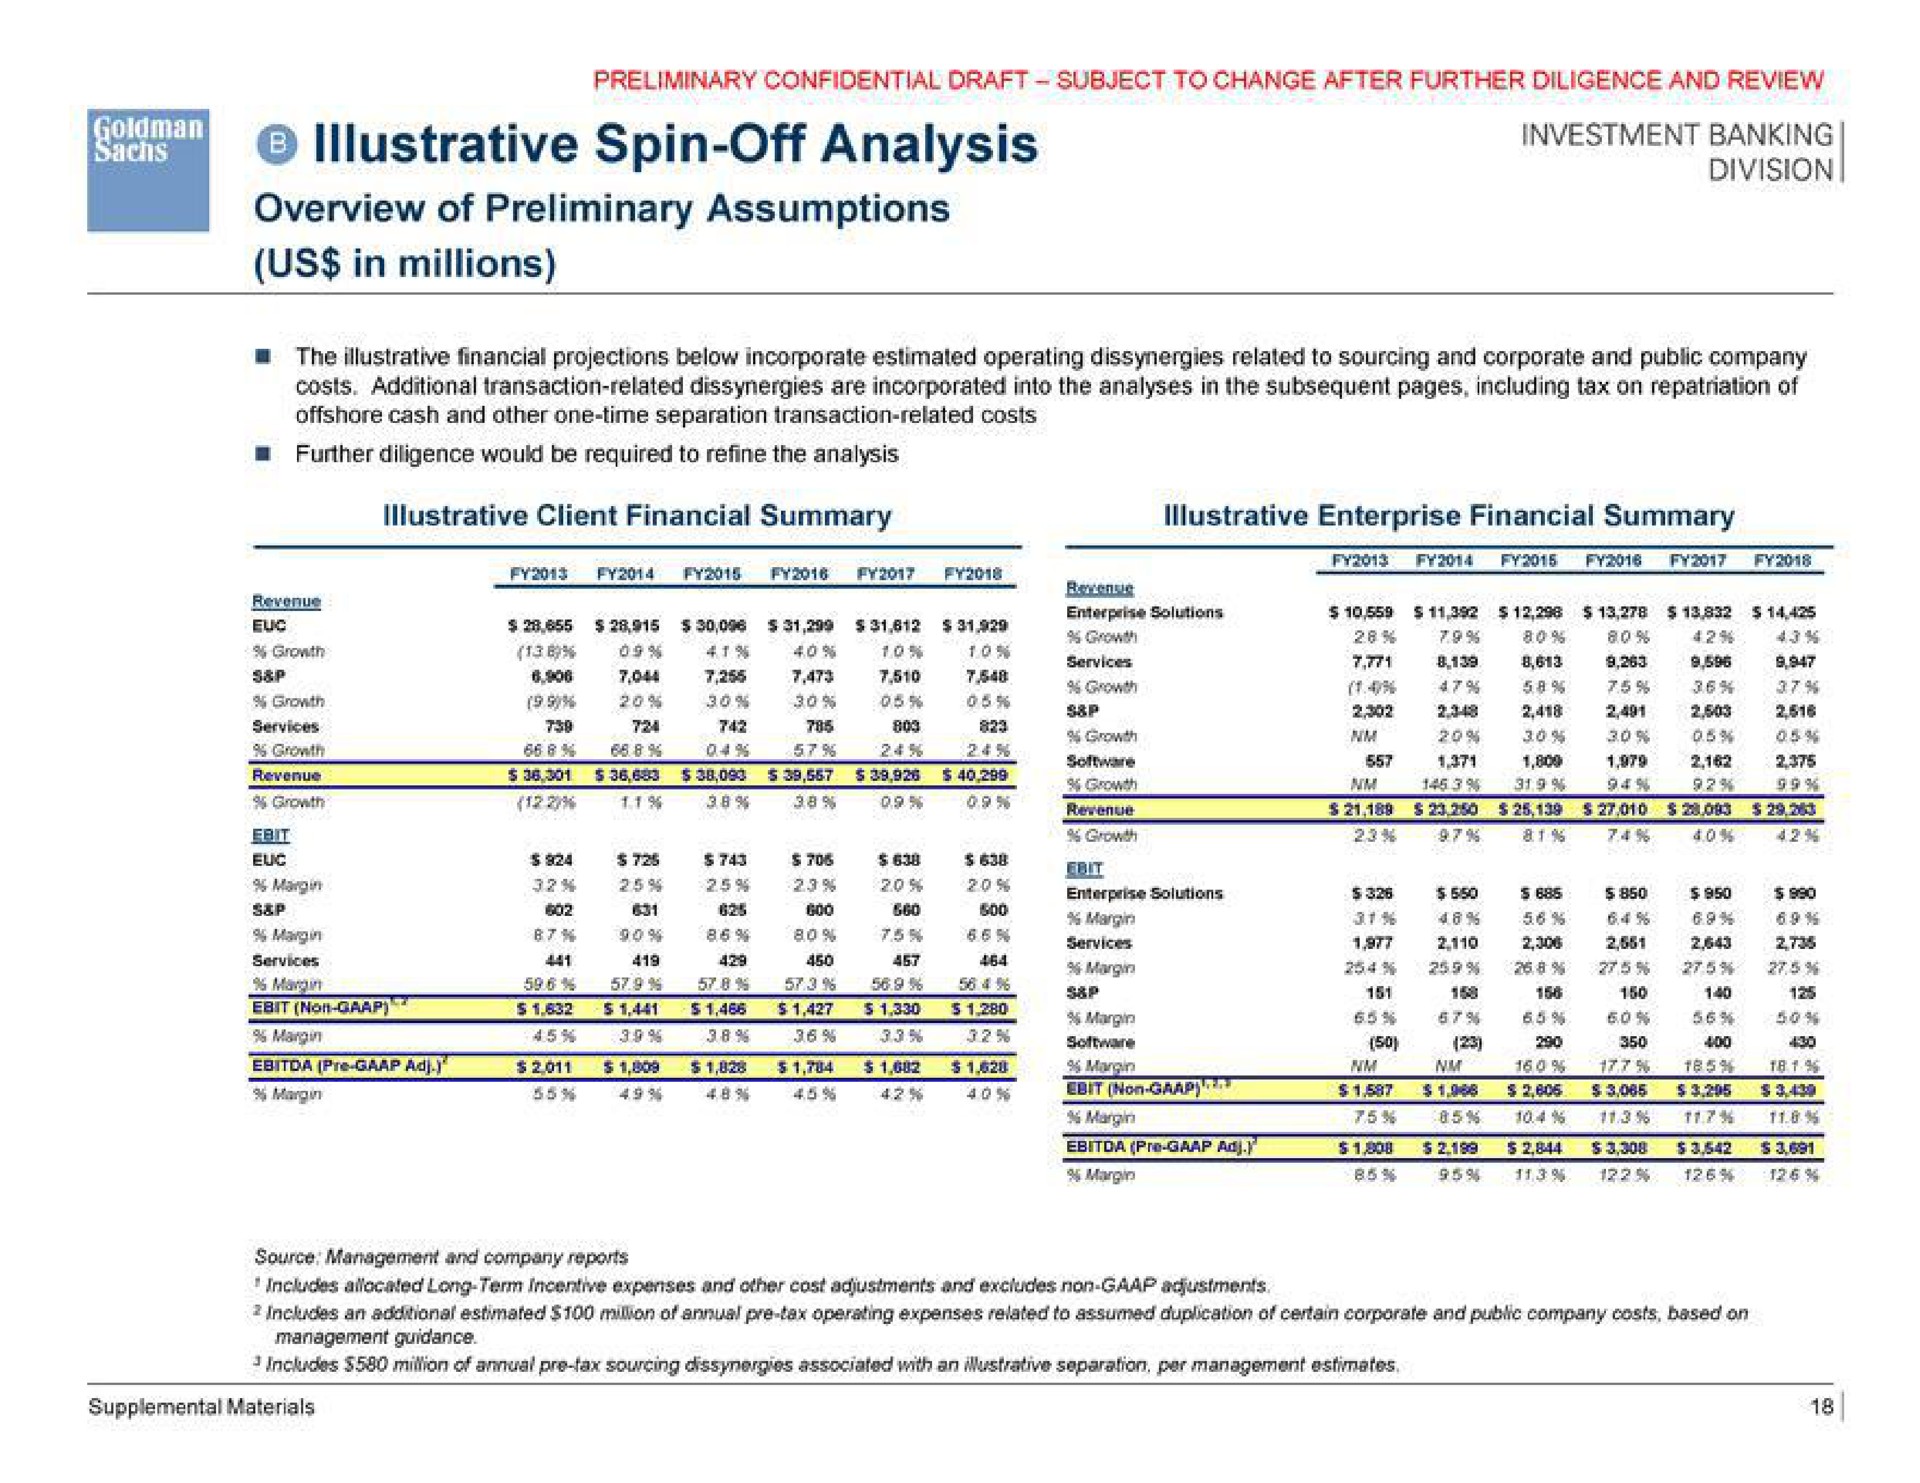 illustrative spin off analysis overview of preliminary assumptions us in millions | Goldman Sachs